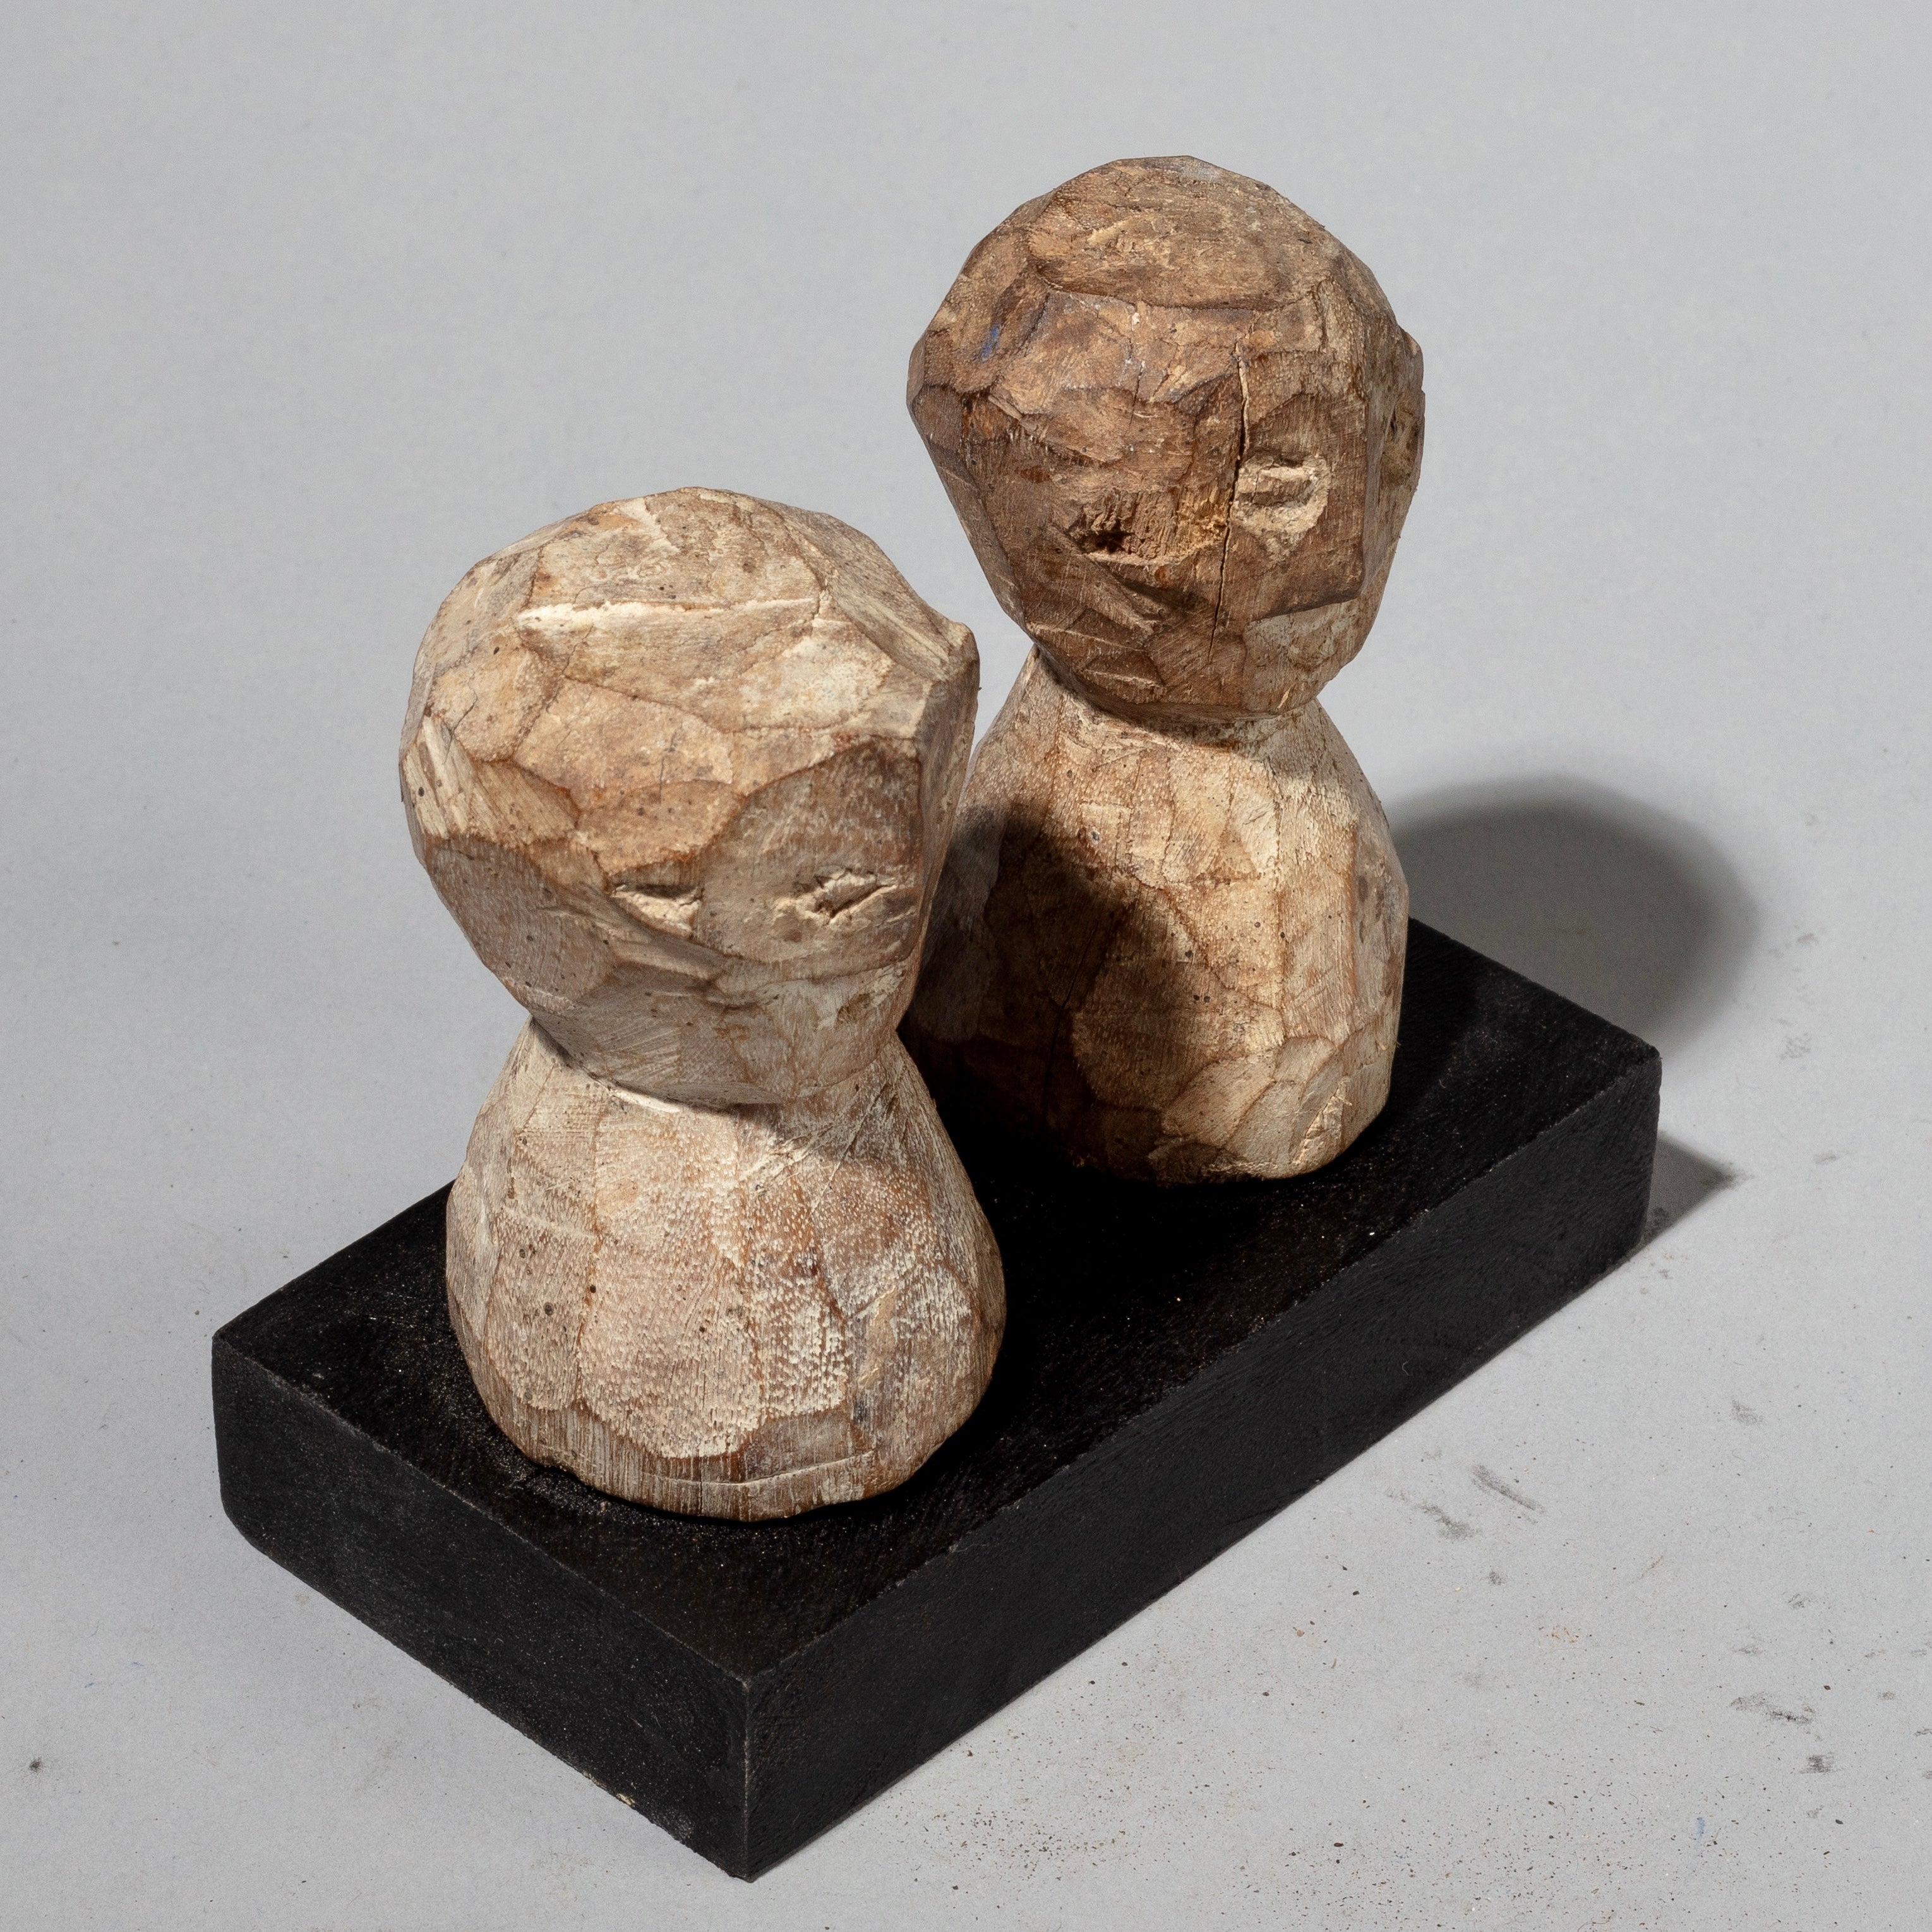 A PAIR OF FIGURATIVE HOUSE ALTAR OBJECTS, ADAN TRIBE FROM GHANA( No 1845)